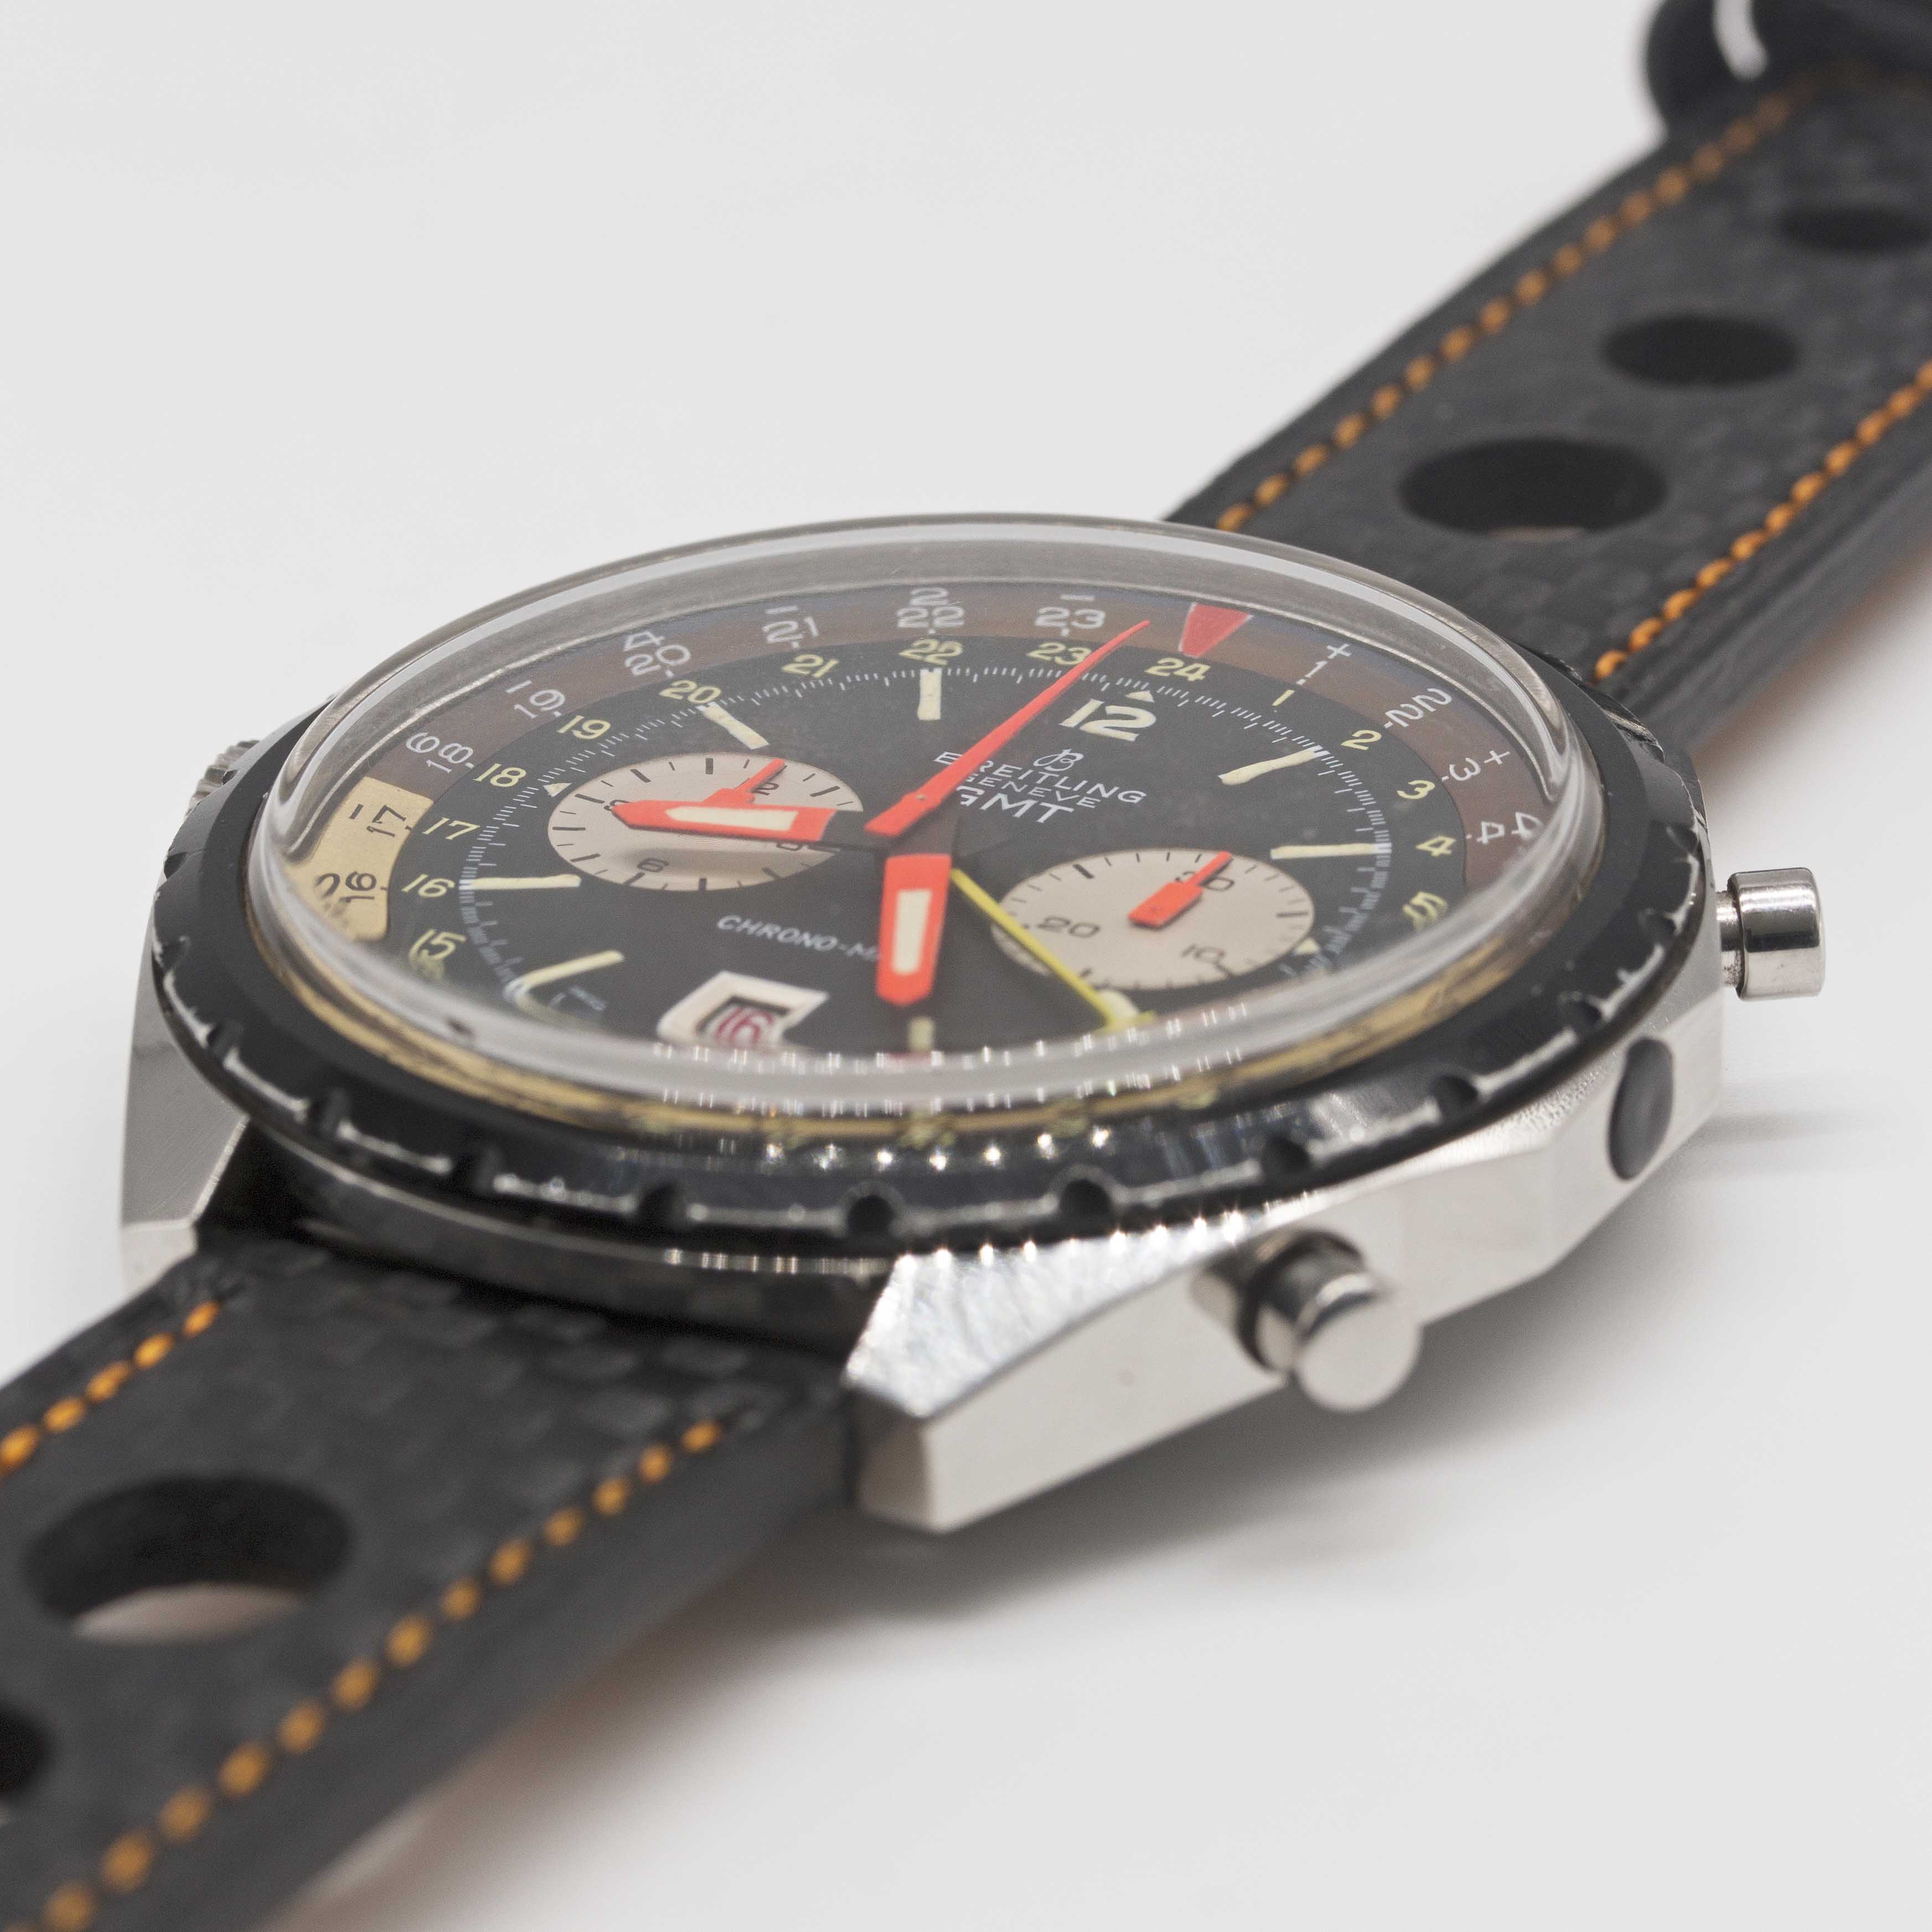 A RARE GENTLEMAN'S STAINLESS STEEL BREITLING GMT CHRONO-MATIC CHRONOGRAPH WRIST WATCH CIRCA 1970, - Image 4 of 10